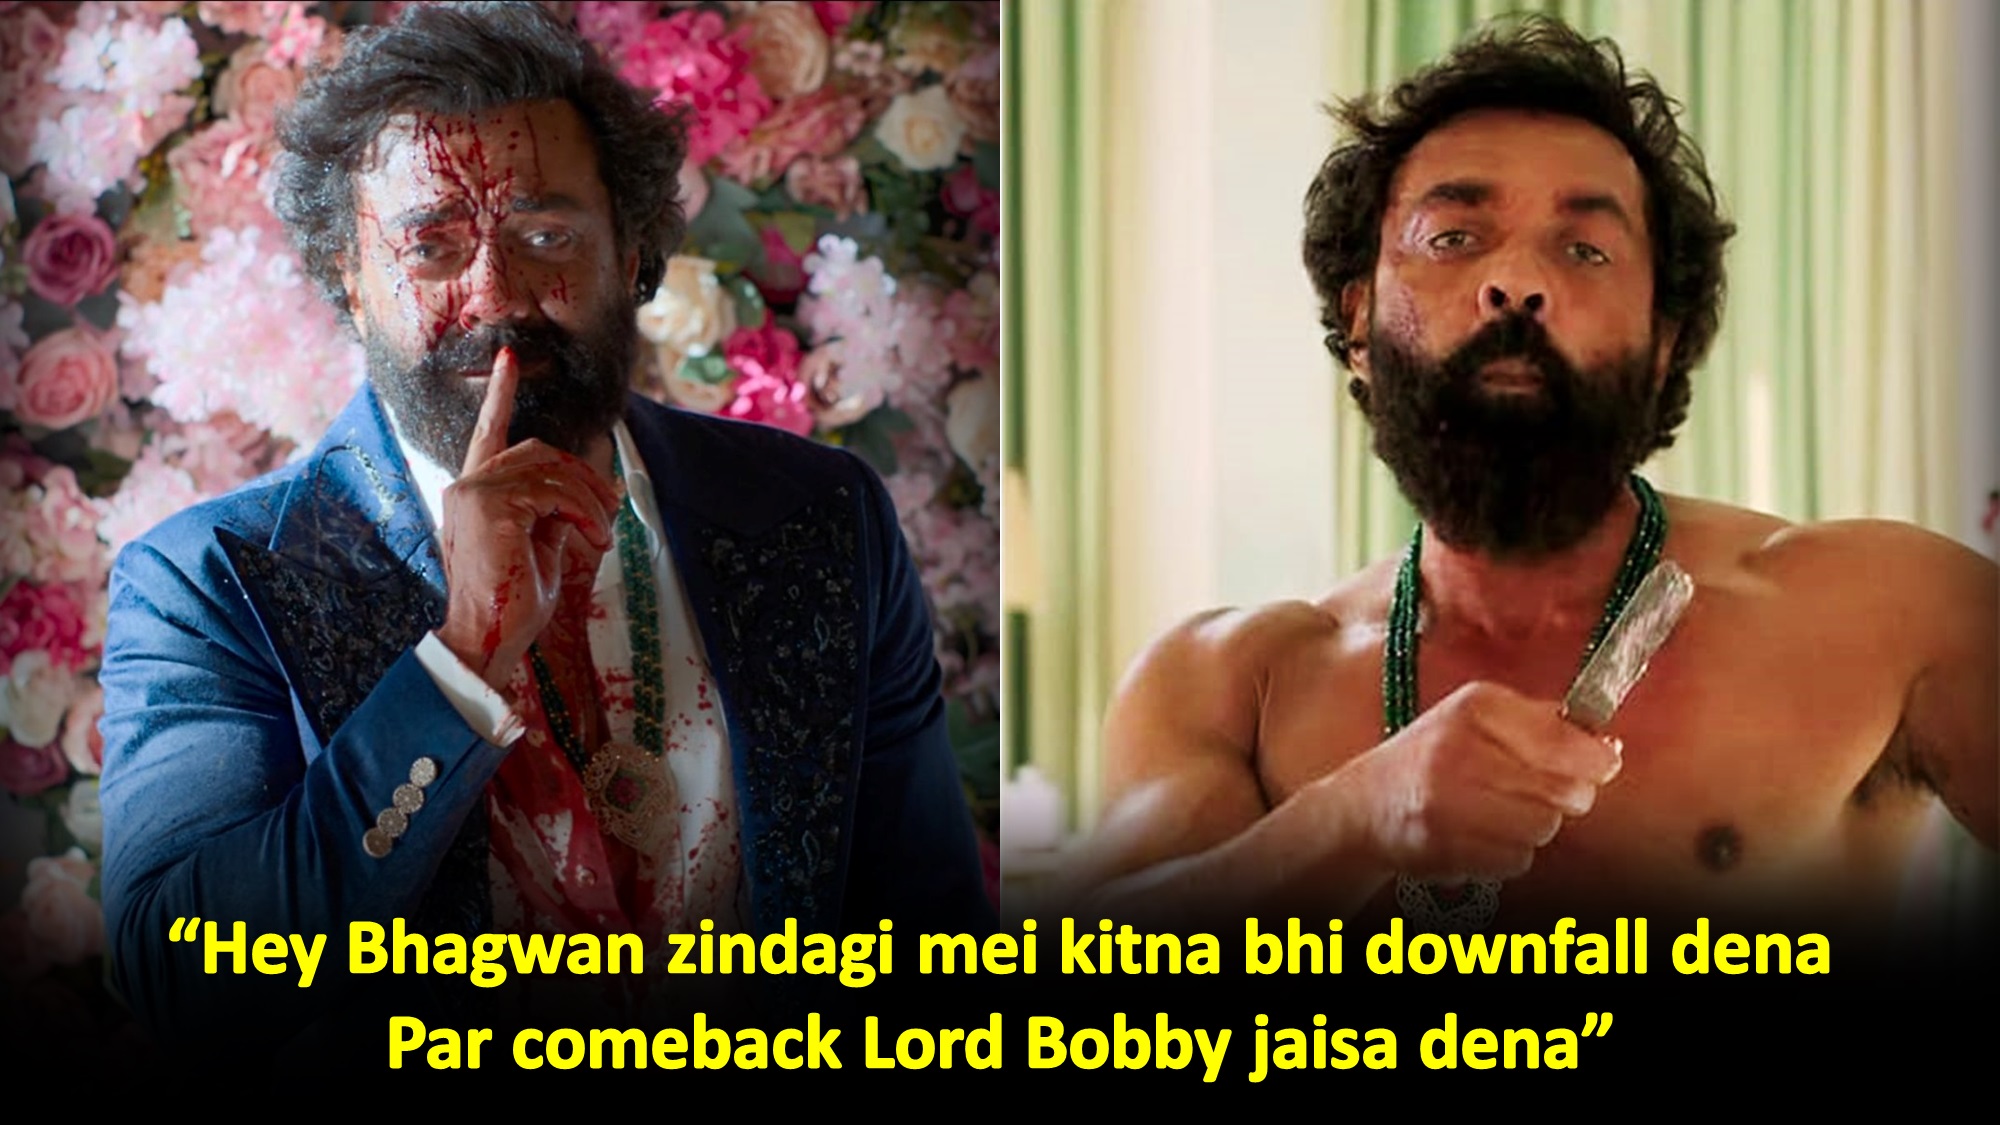 Viral Memes Celebrate Bobby’s ‘Animal’ Return; Are Fans More Excited About Him Than Ranbir?